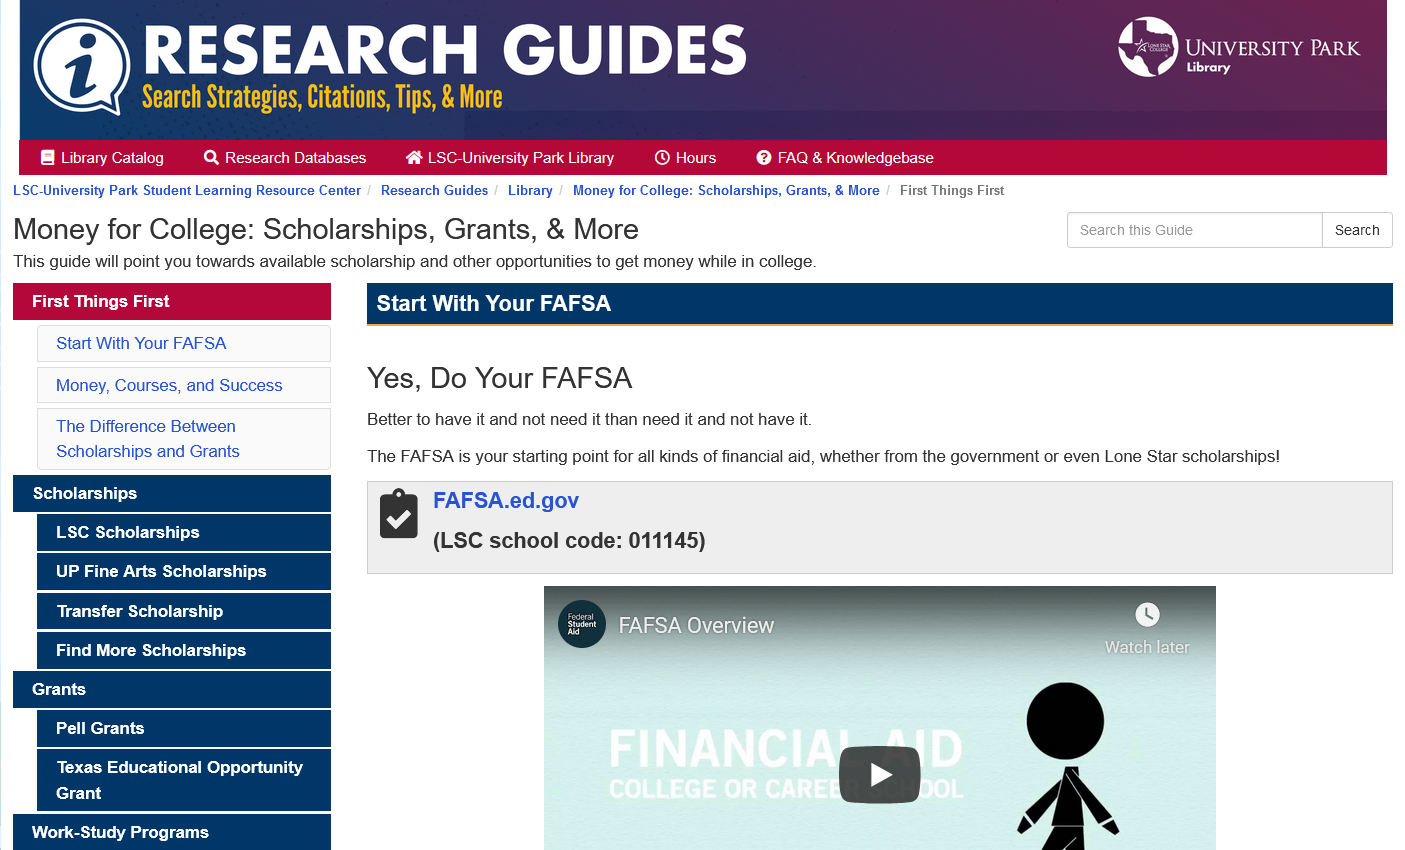 Money for college guide, starting with encourgement to file FAFSA